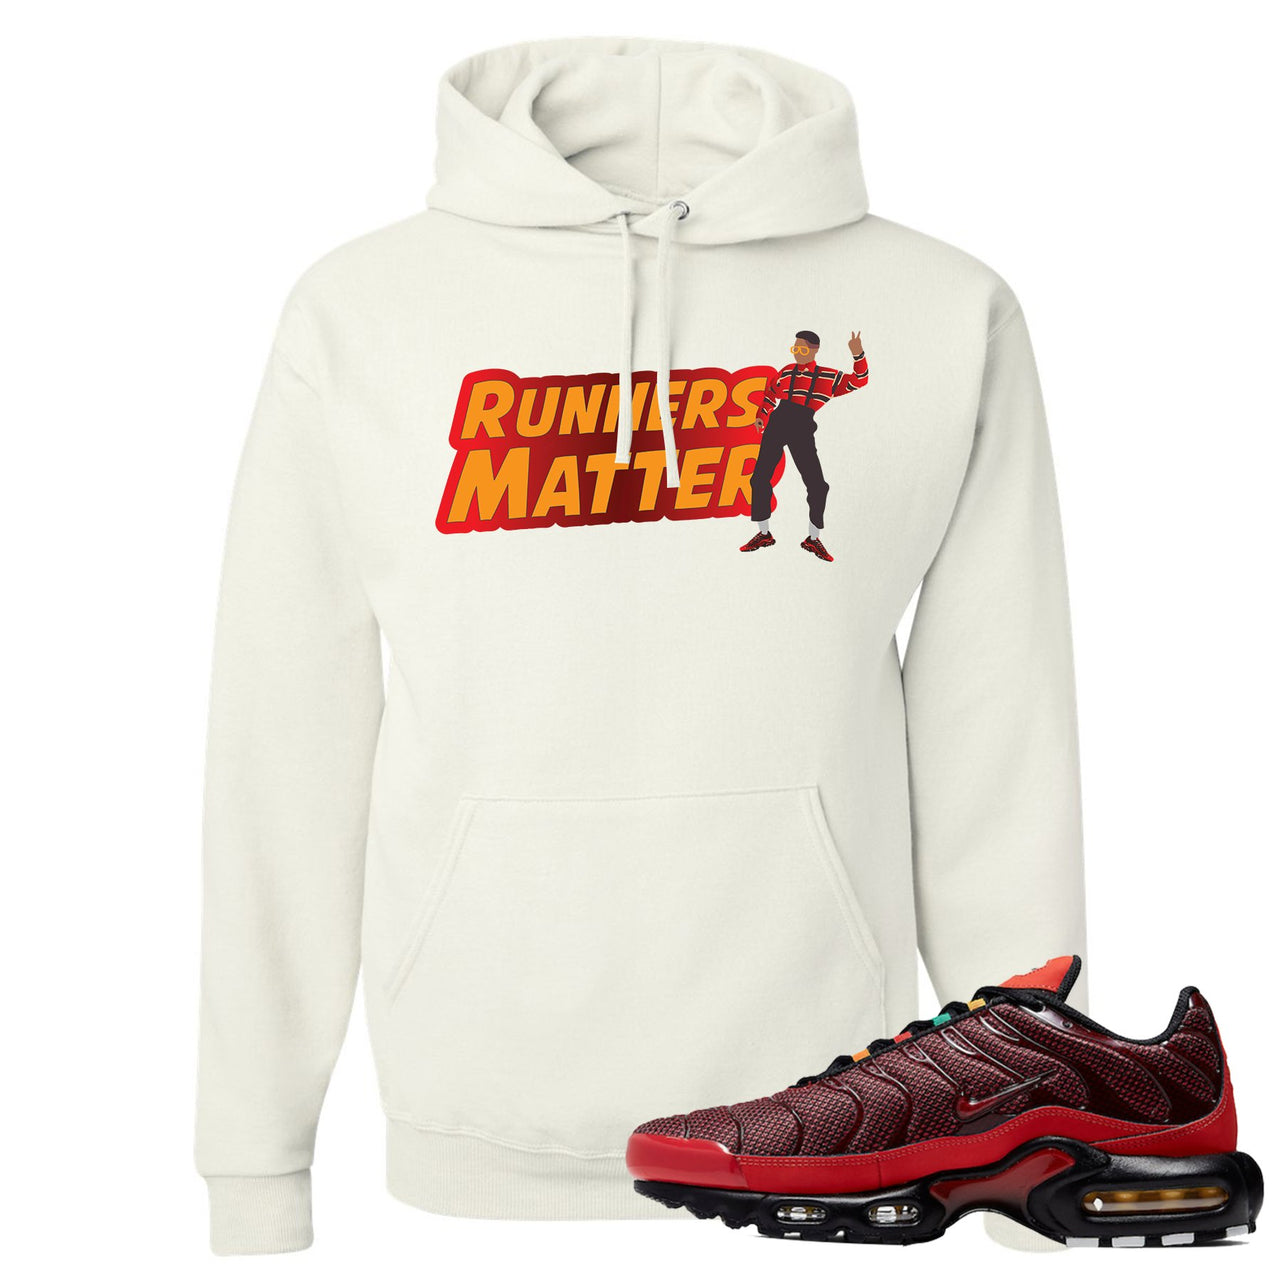 printed on the front of the air max plus sunburst sneaker matching white pullover hoodie is the runners matter logo